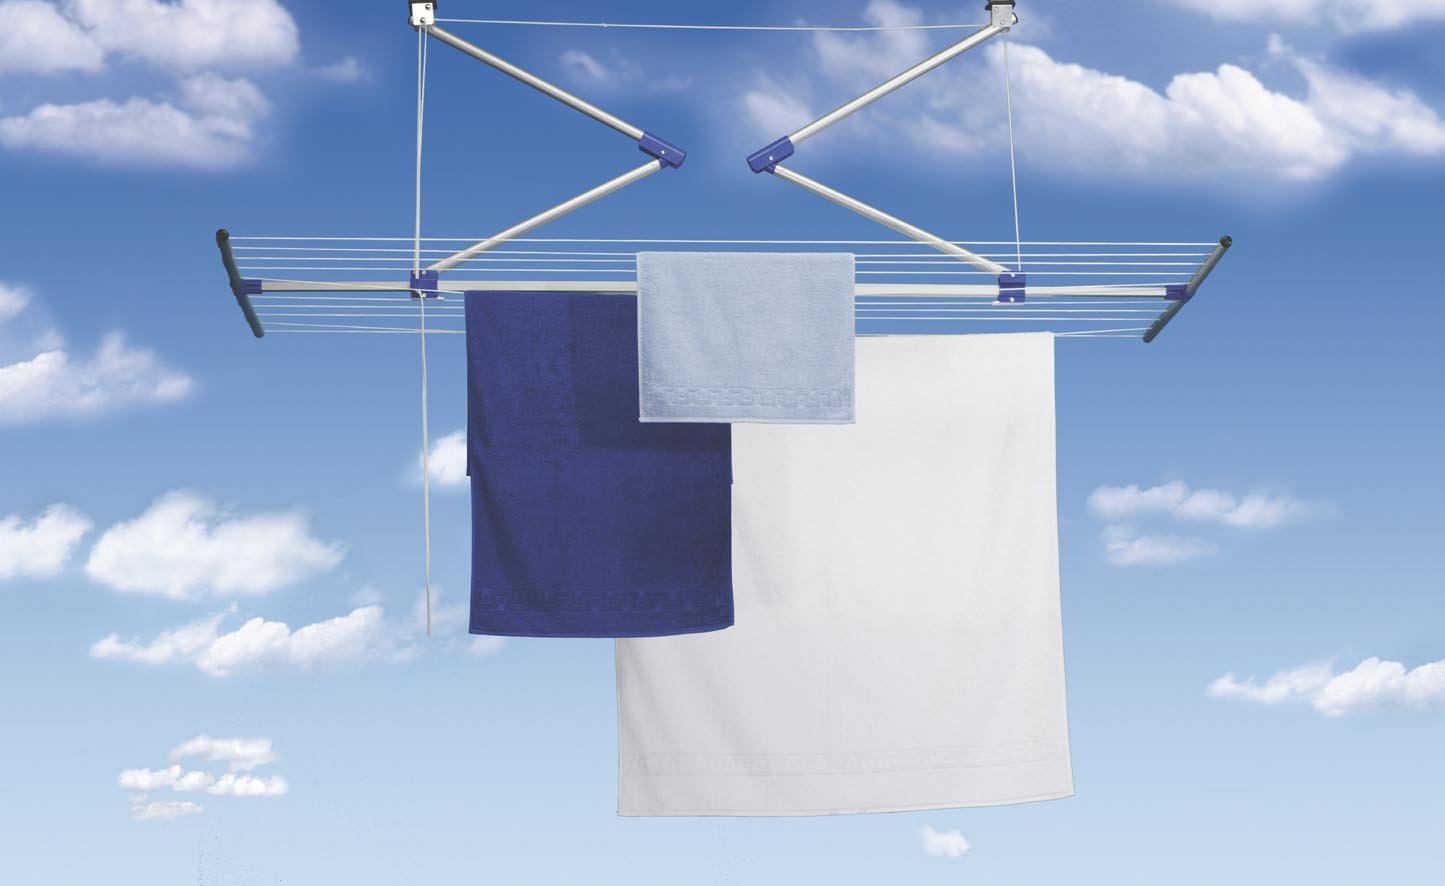 http://www.clotheslines.com/Shared/Images/Product/Lift-Laundry-Drying-Rack-Ceiling-Clothes-Airer/StewiLiftCeilingClothesAirer.jpg